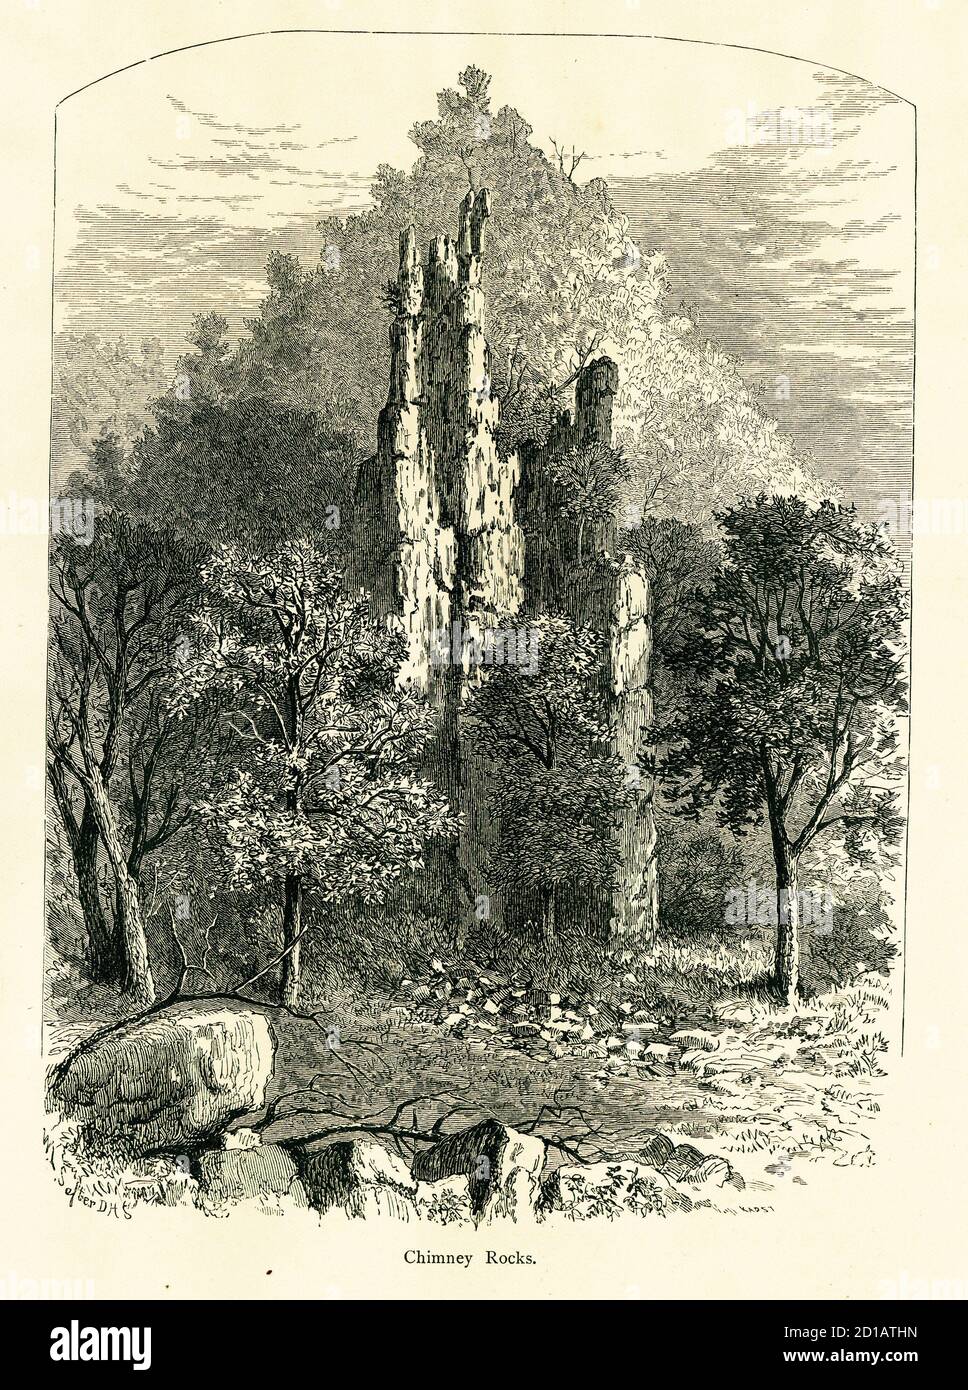 Wood engraving of Chimney Rocks, located in George Washington National Forest, West Virginia, USA. Illustration published in Picturesque America or th Stock Photo